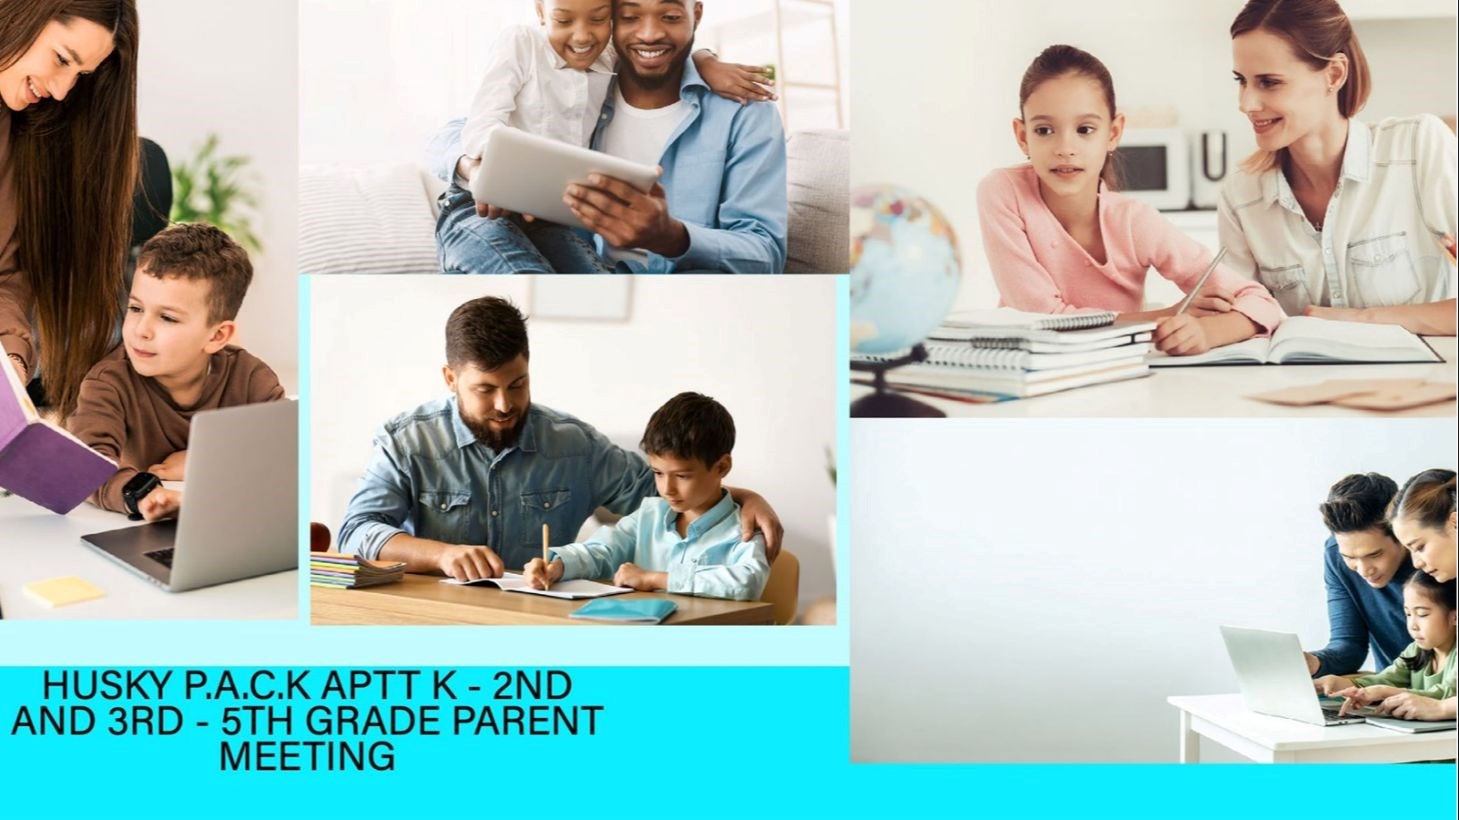 Families helping students with homework and learning